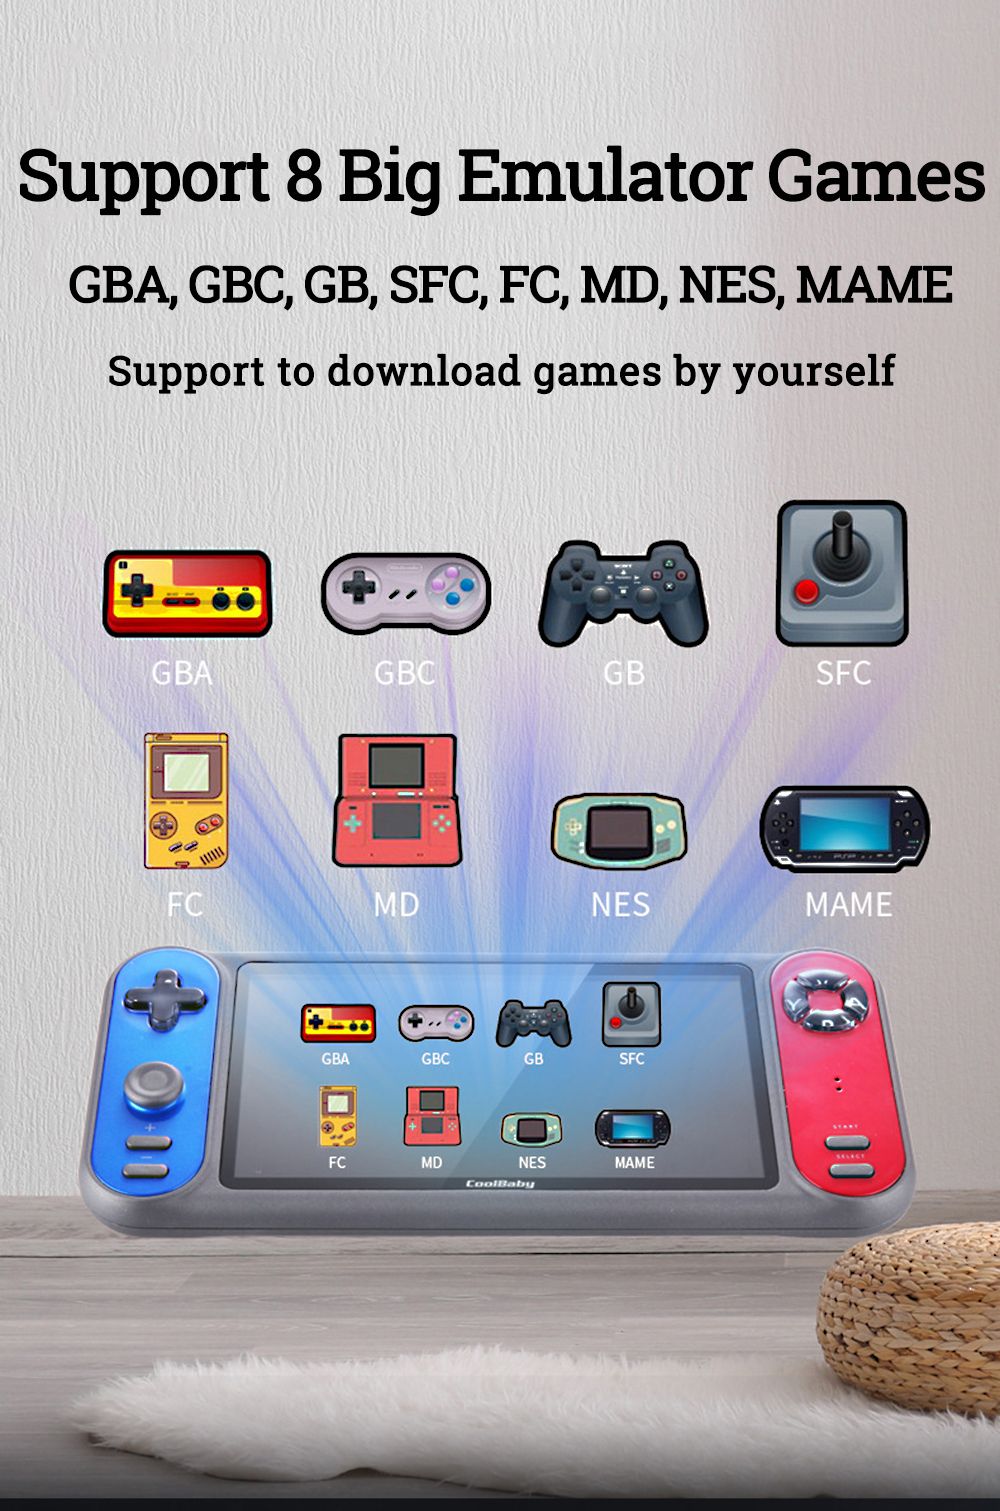 CoolBaby-RS-17-8GB-1200-Games-7-inch-HD-Arcade-Handheld-Game-Console-Support-FC-MD-NES-MAME-GB-Ebook-1661630